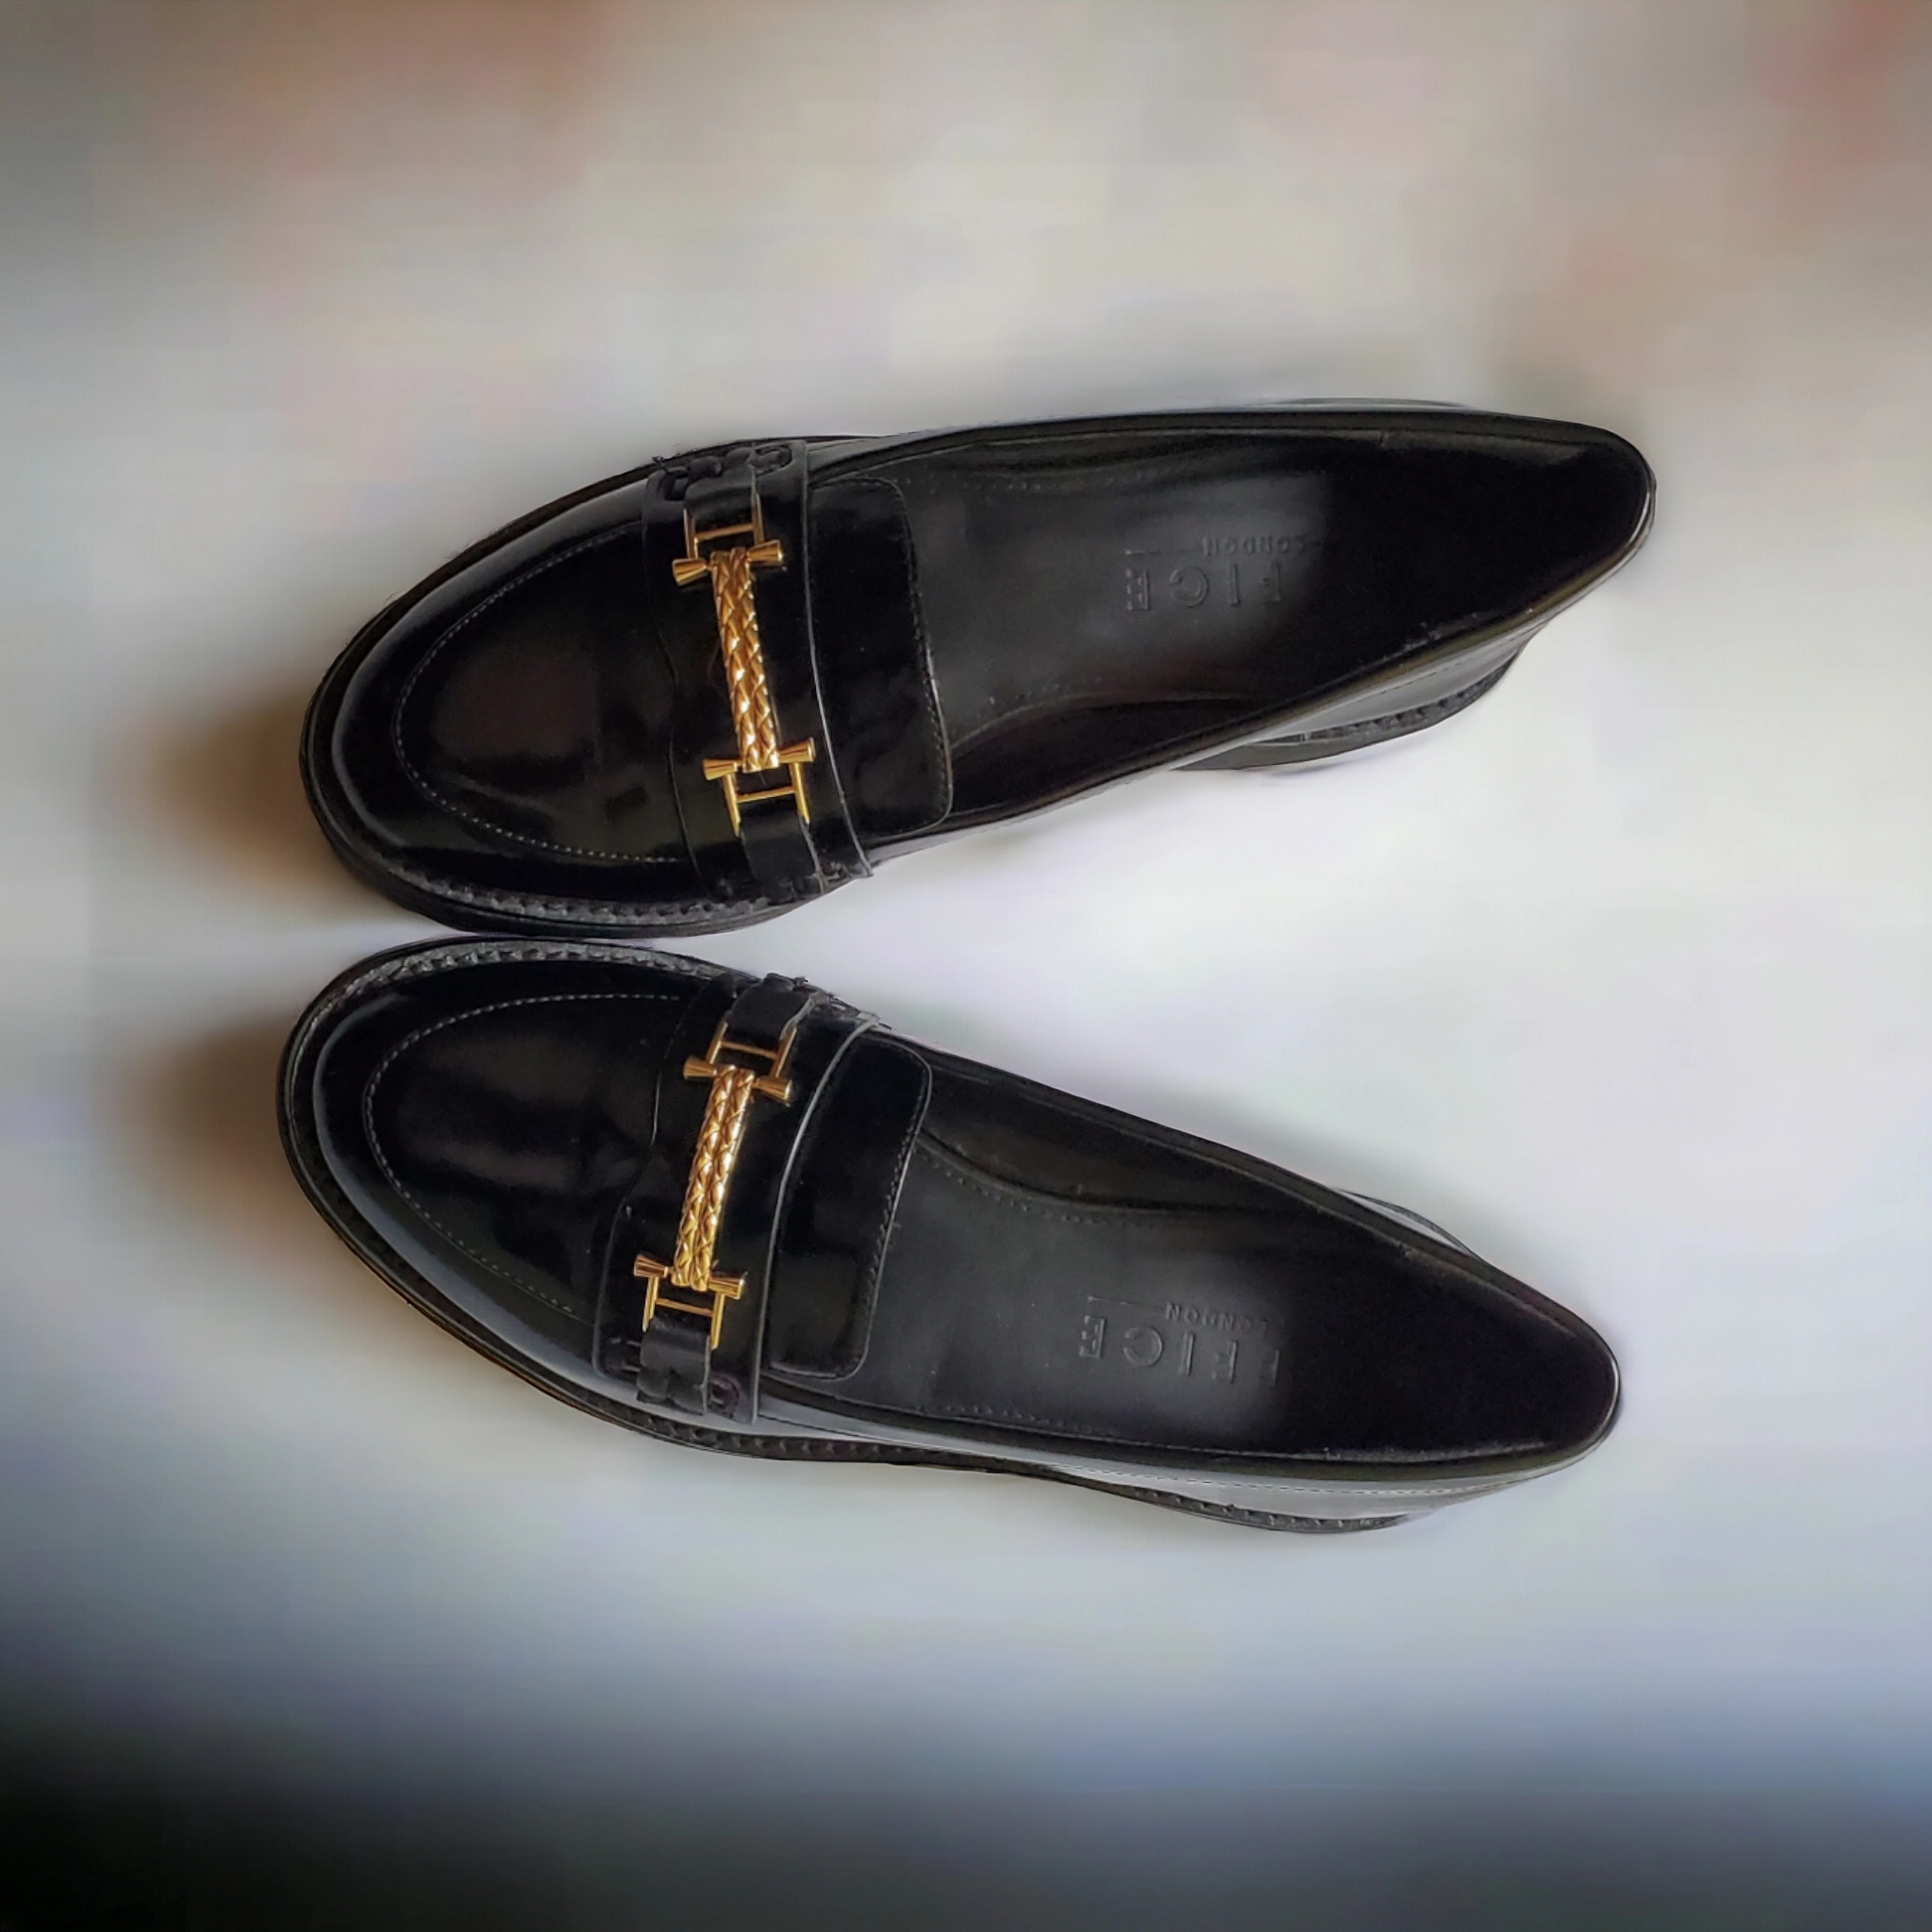 High sole loafers